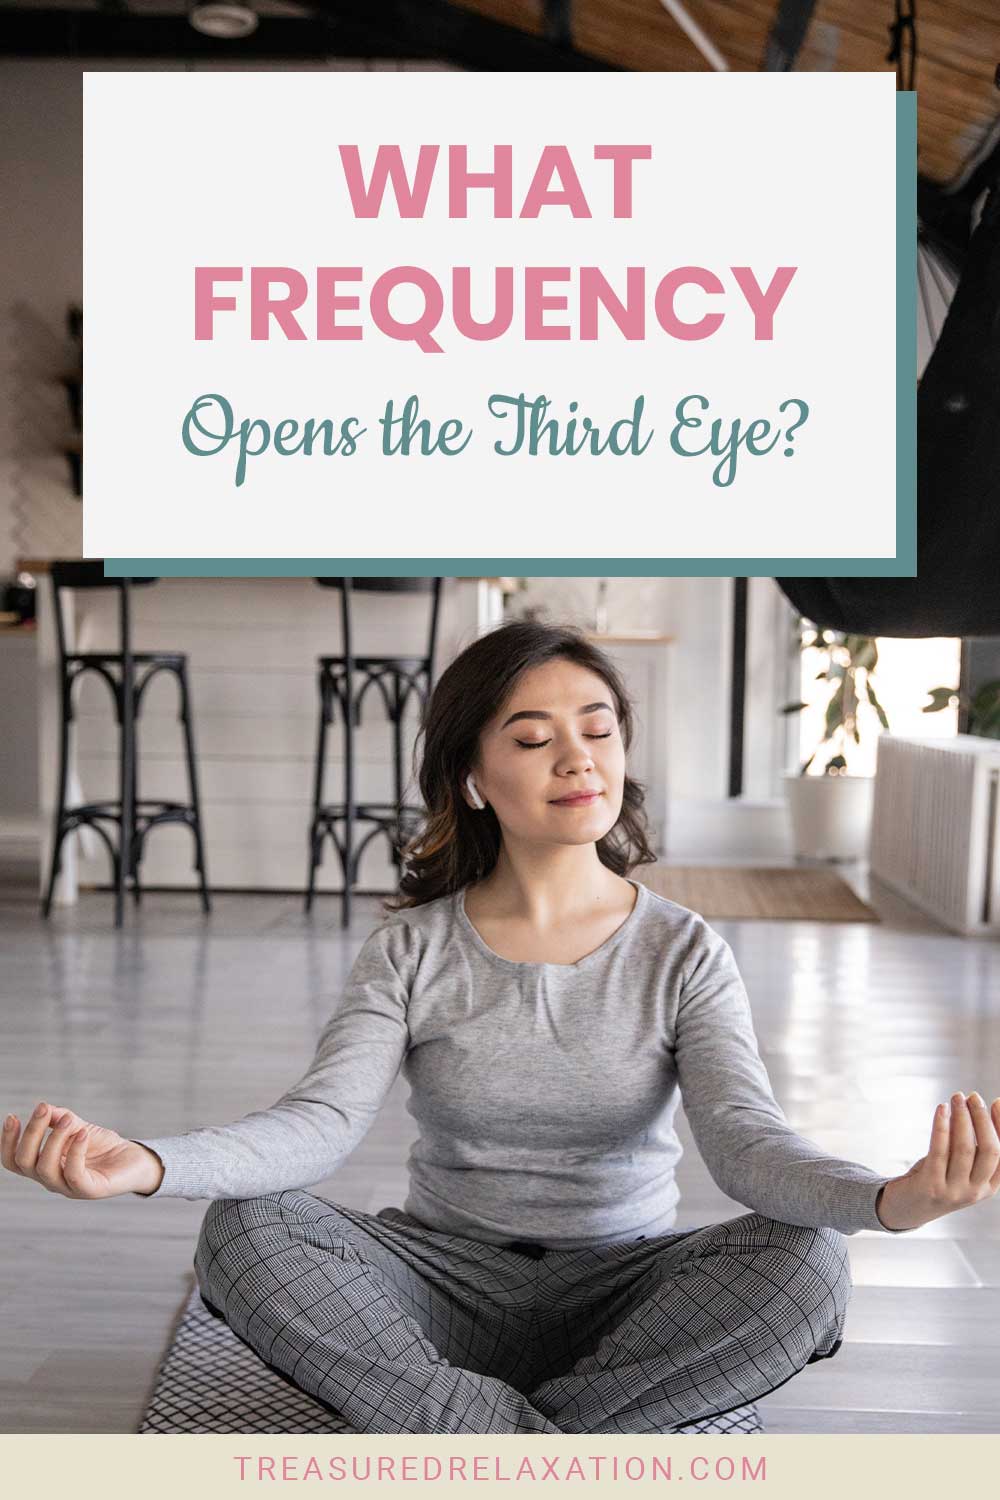 What Frequency Opens the Third Eye?